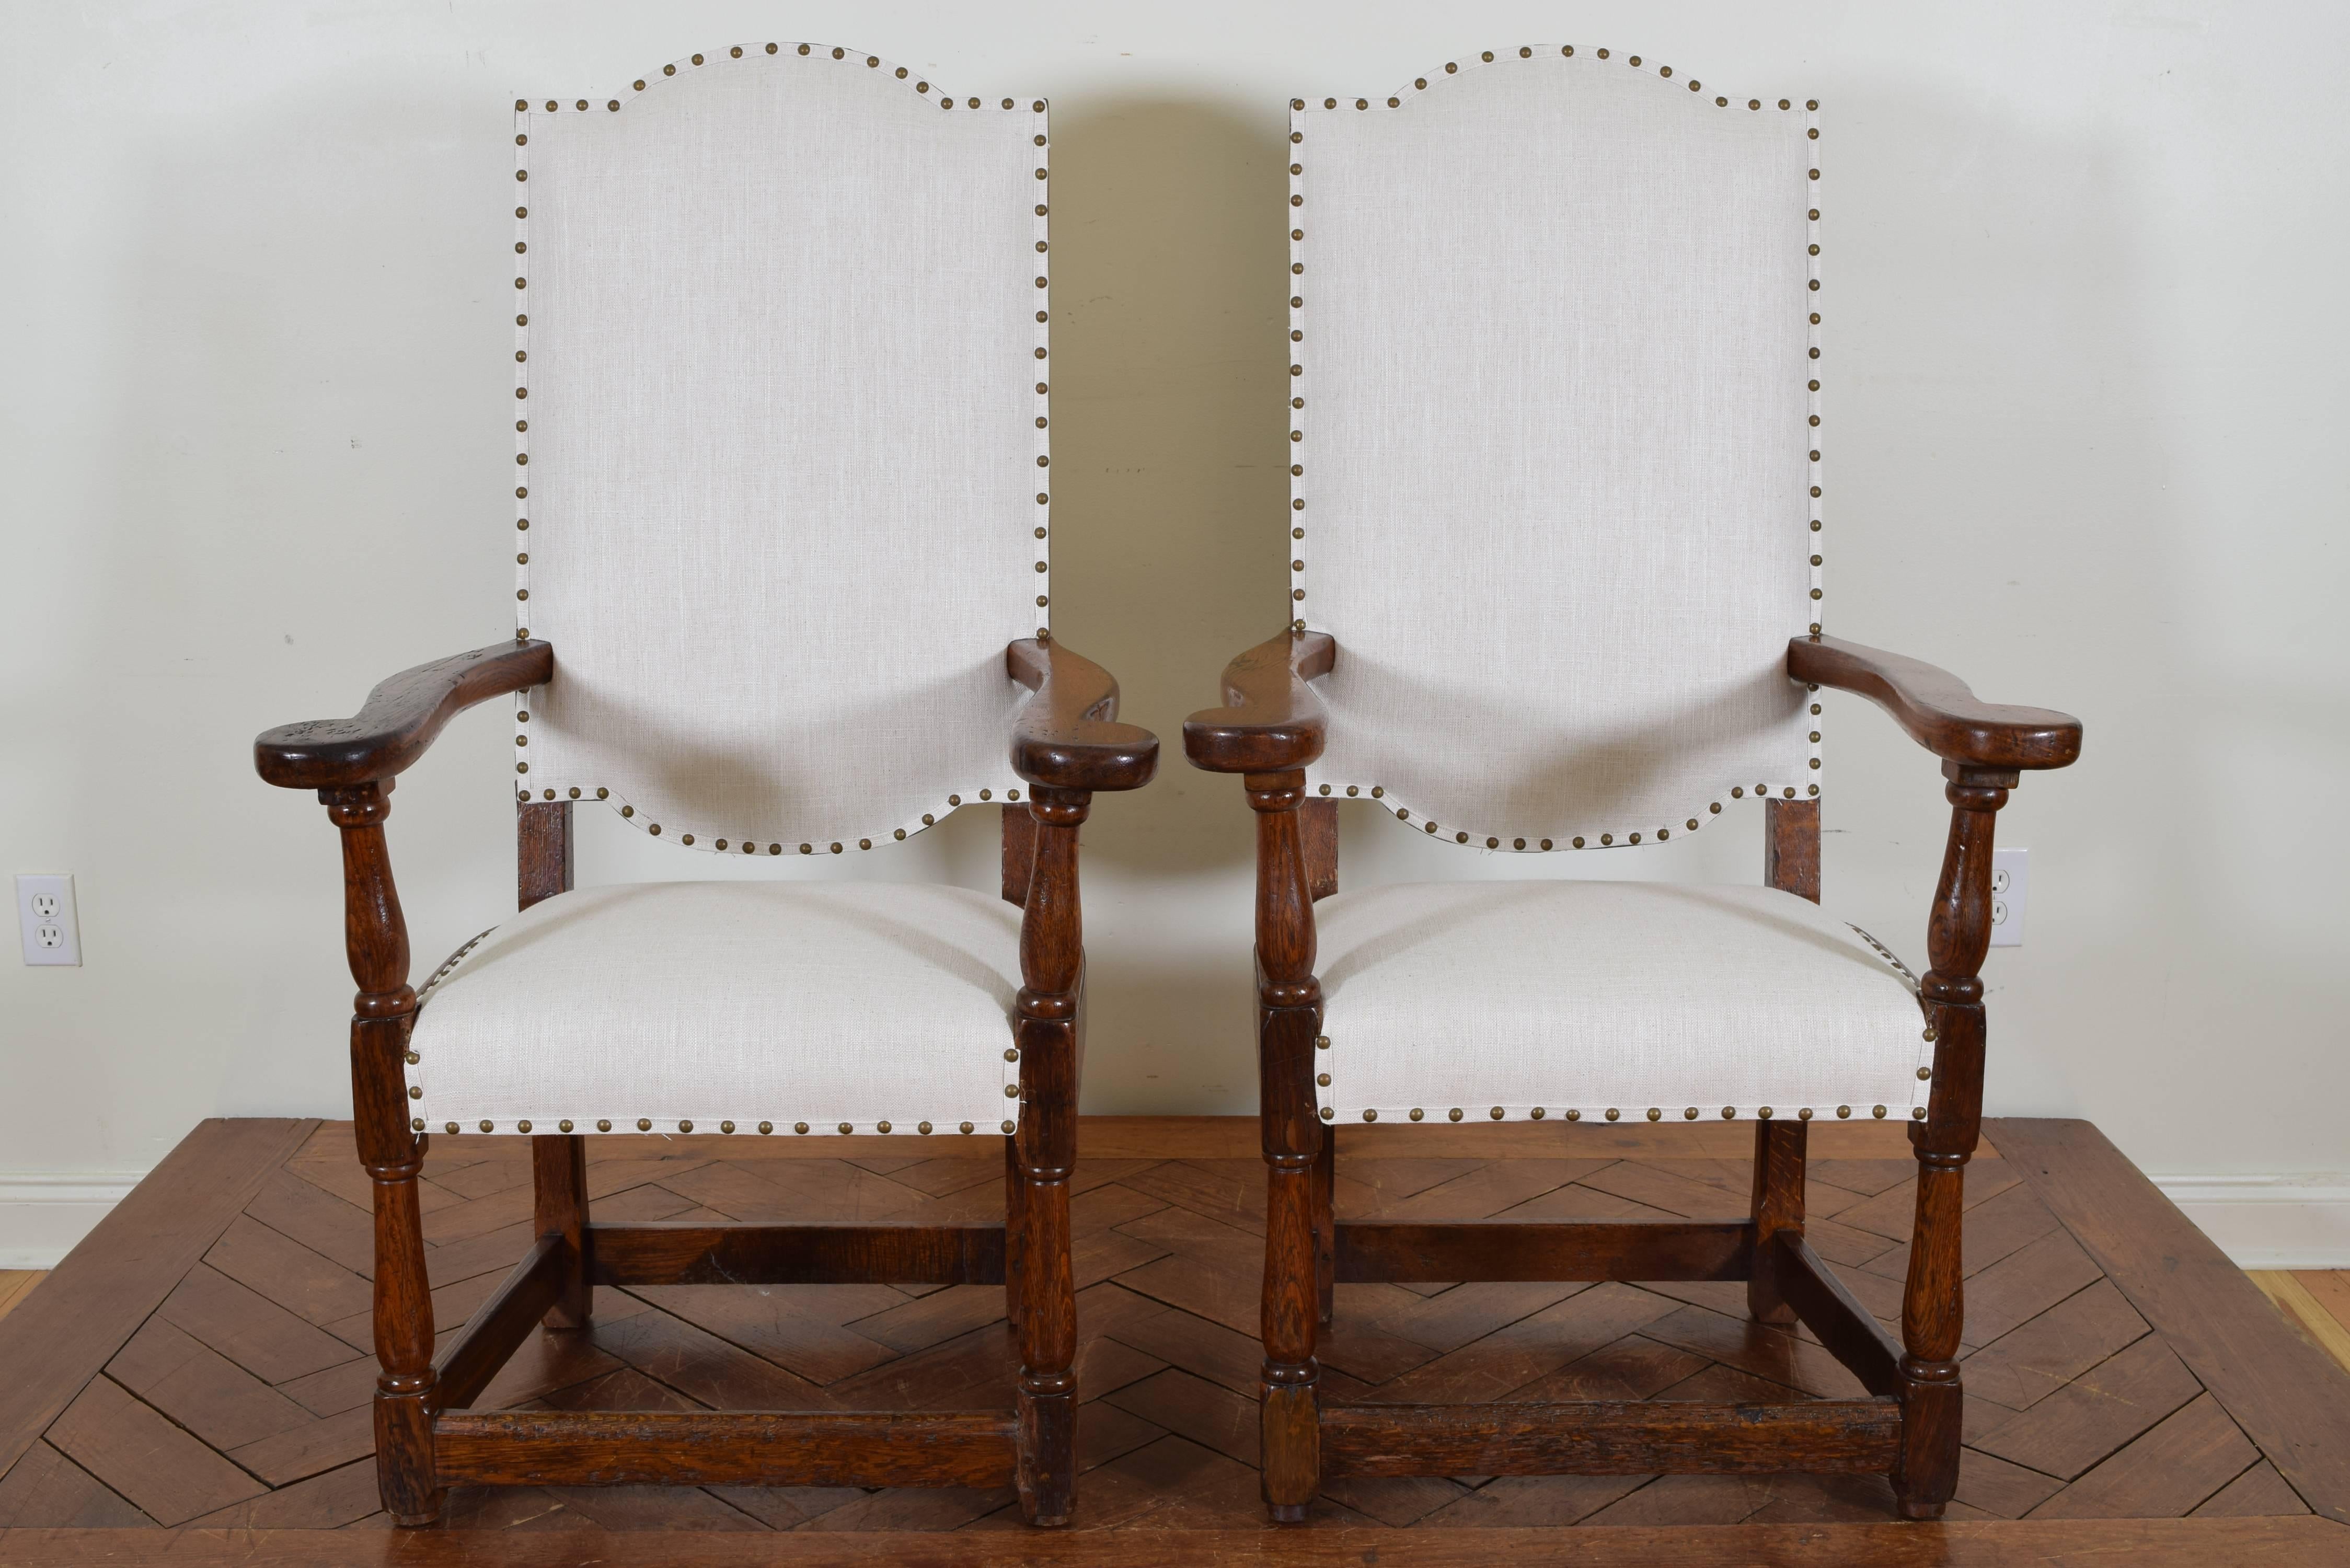 In the Renaissance style with wide arms and deep seats, having shaped backrests and outwardly turned arms in the style of a caquetoire chair, box stretchers.